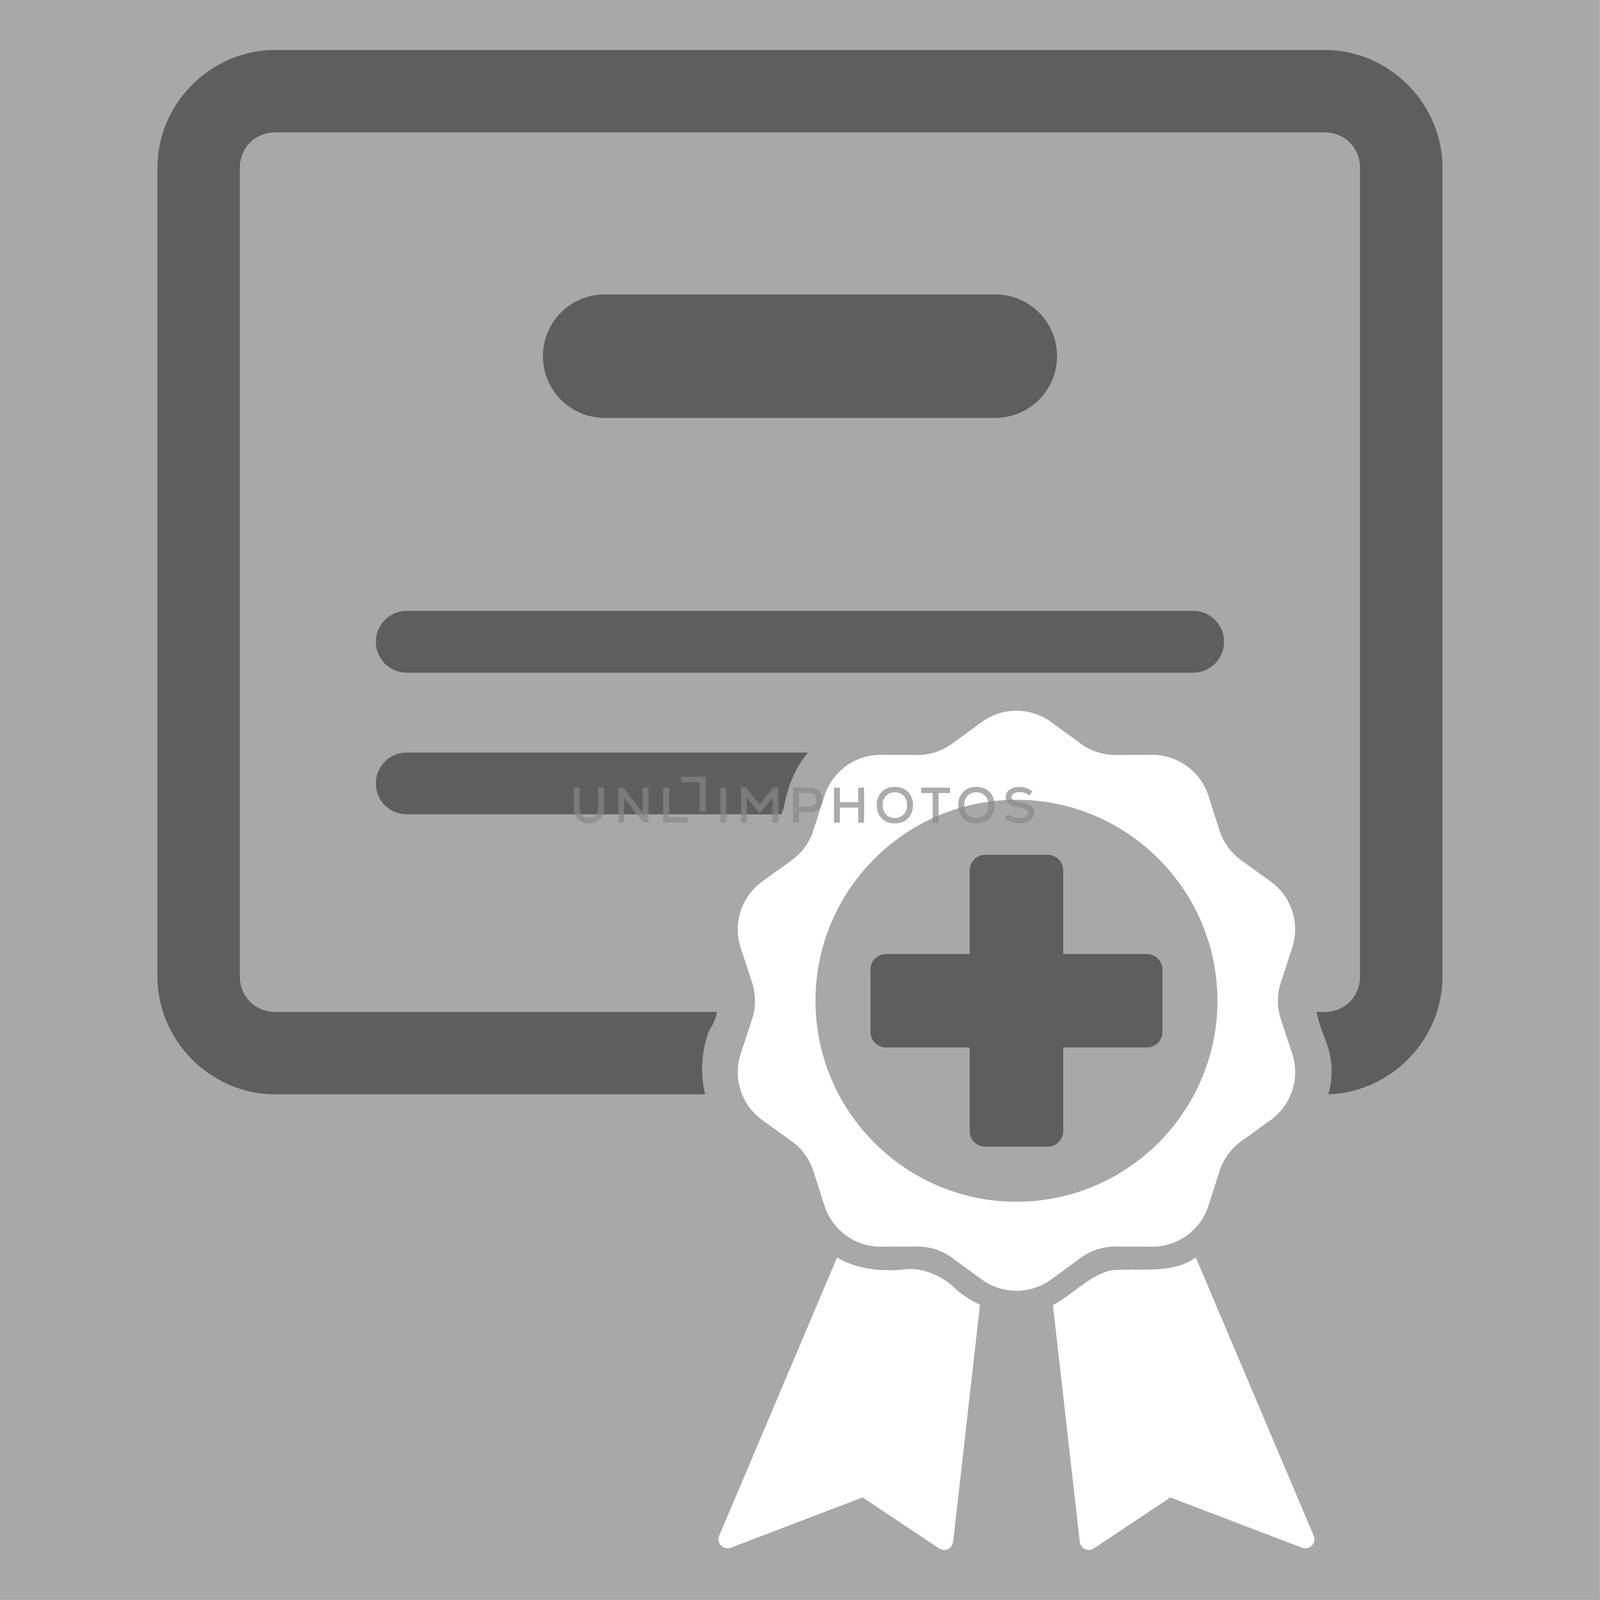 Medical Certificate raster icon. Style is bicolor flat symbol, dark gray and white colors, rounded angles, silver background.